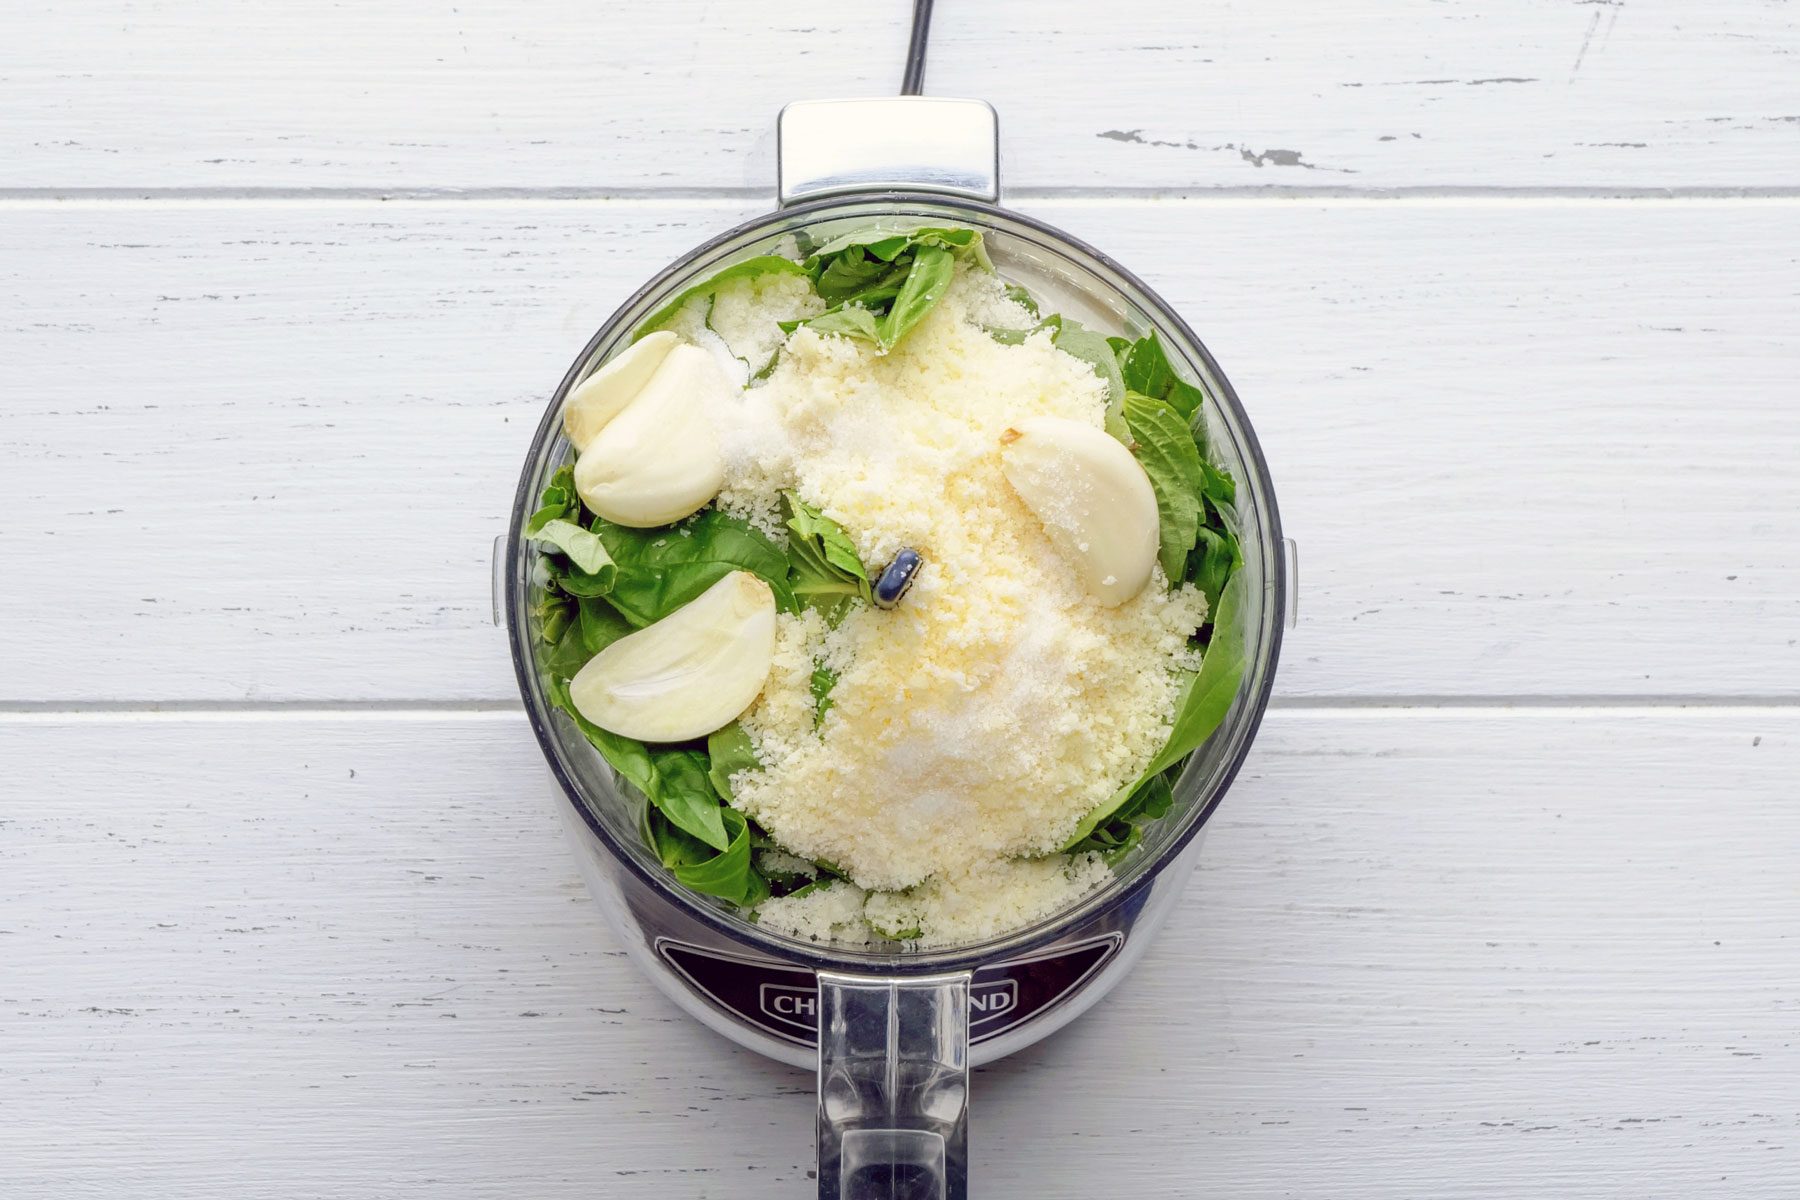 grated cheese, garlic and Basil leaves in a blender on a wooden table